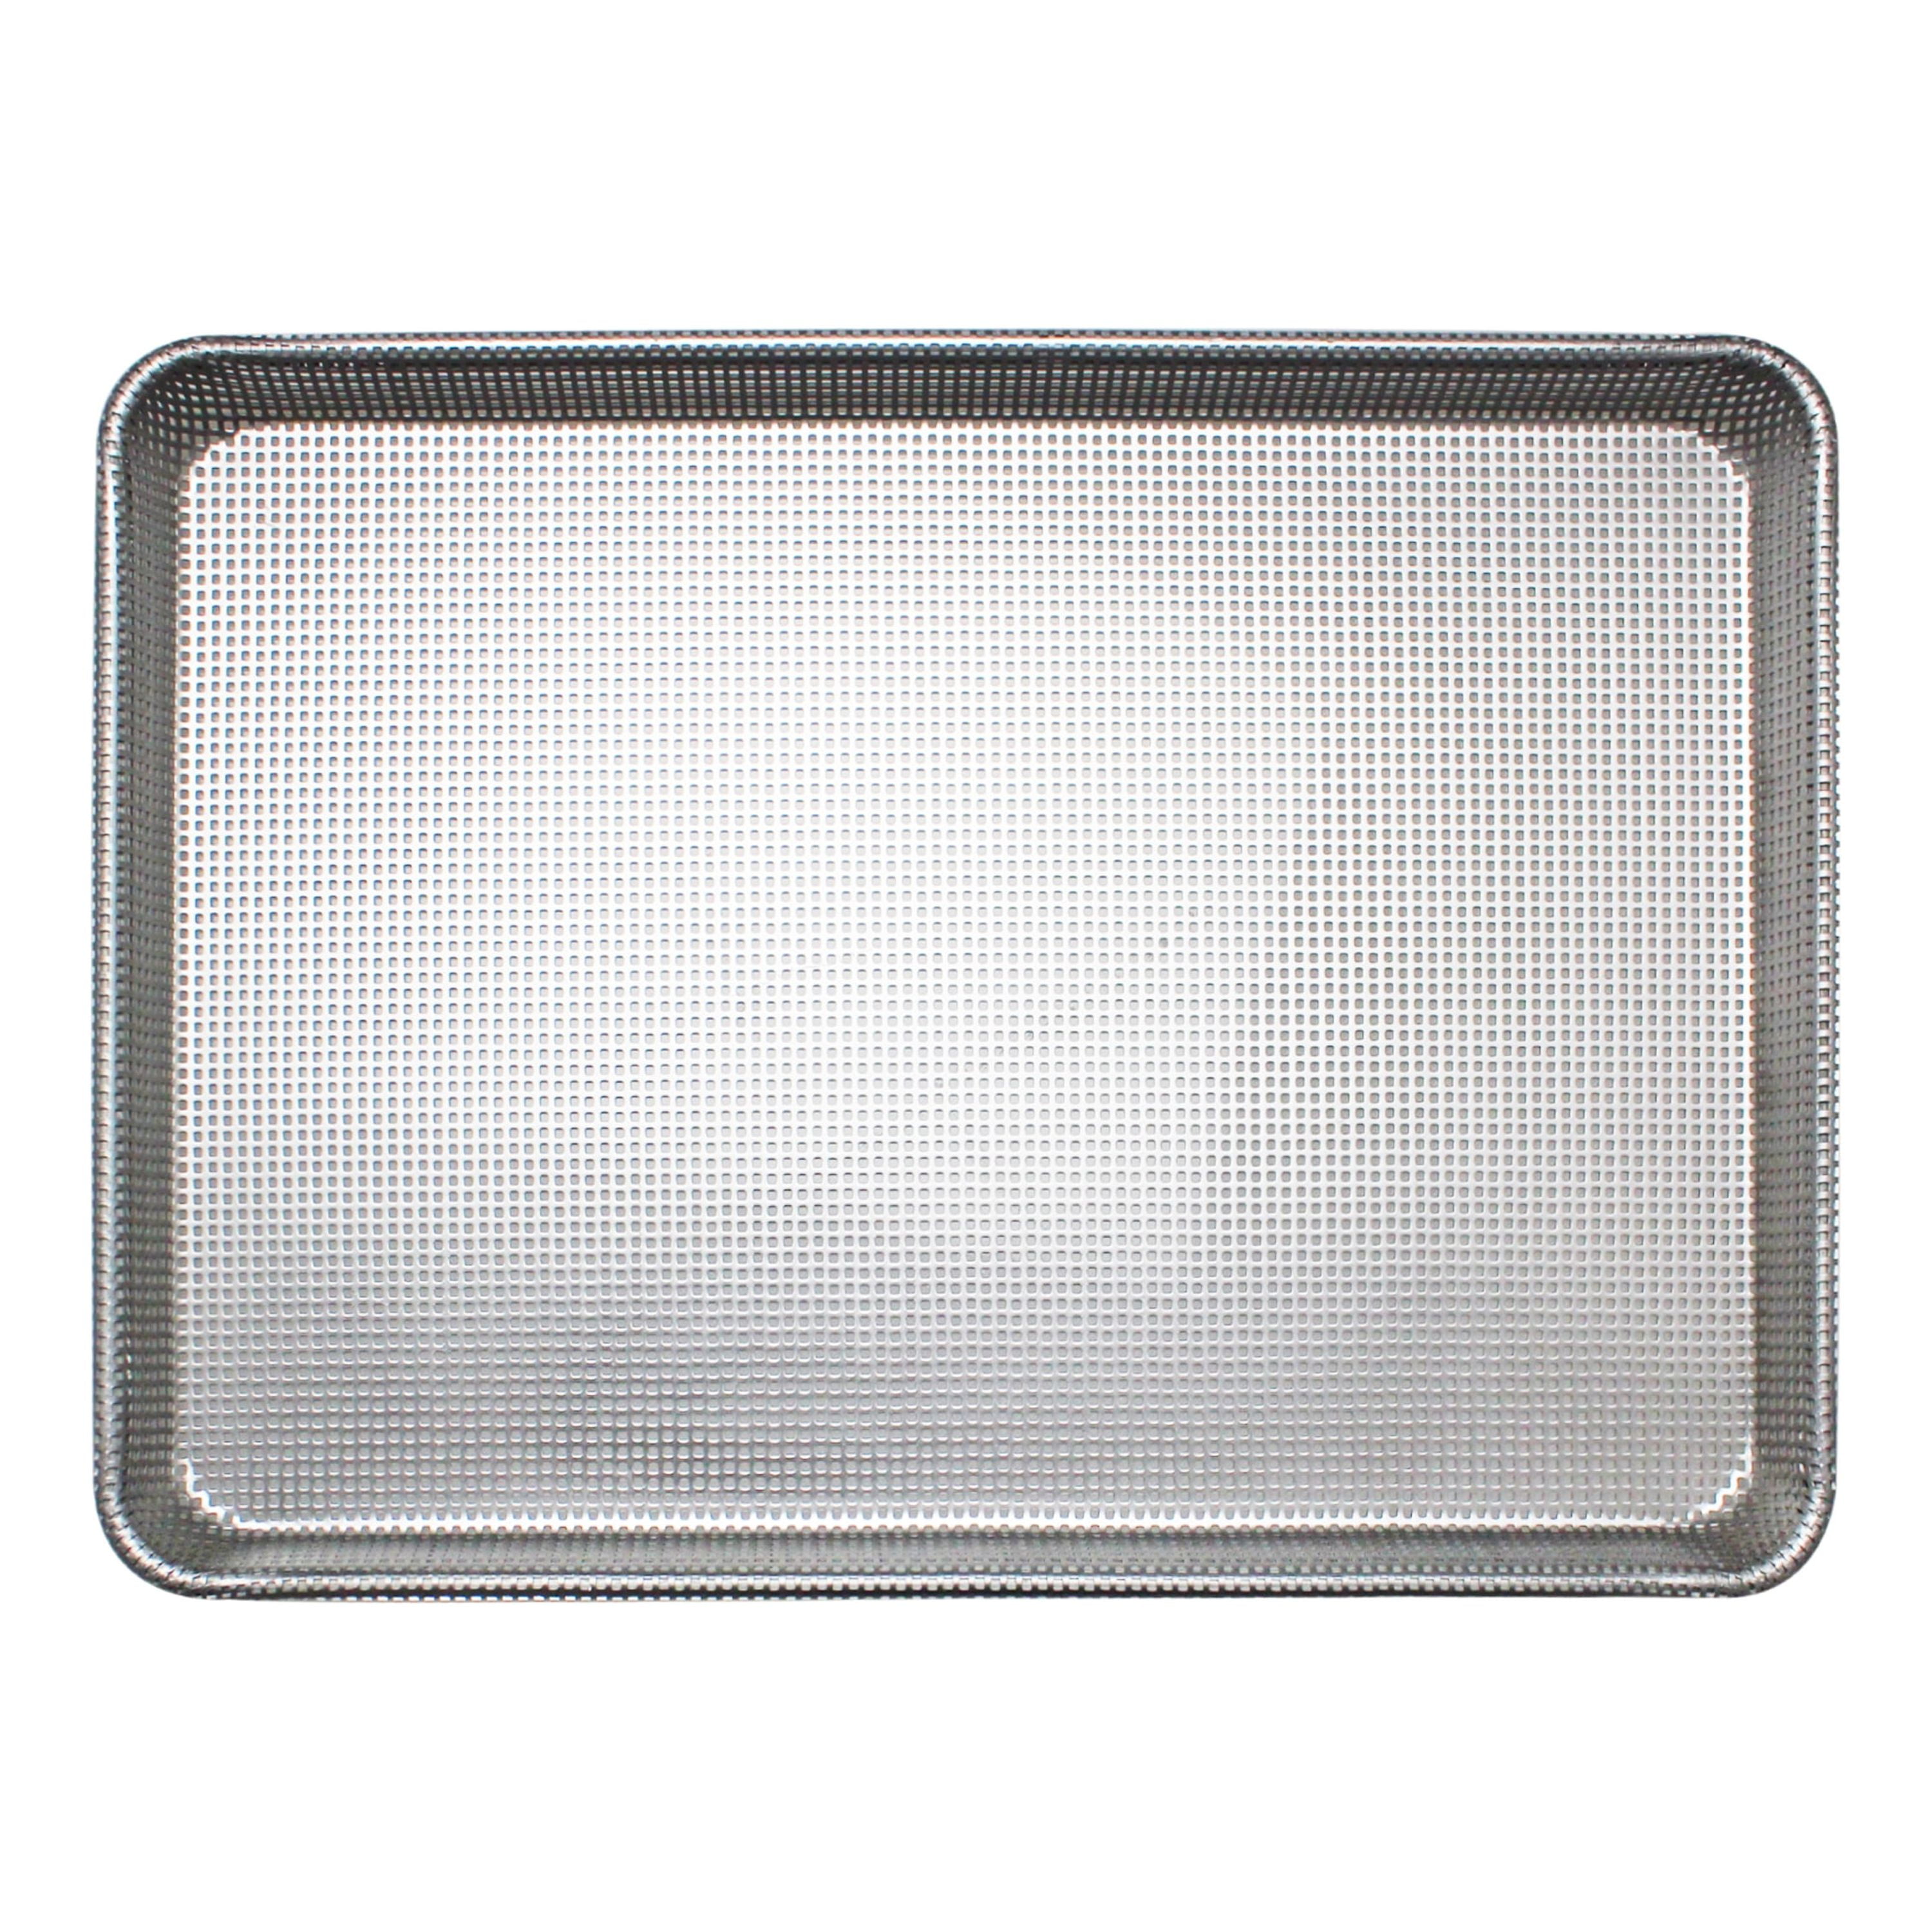 Perforated Full Size Sheet Pan 18x26, Used - Discount Bakery Equipment